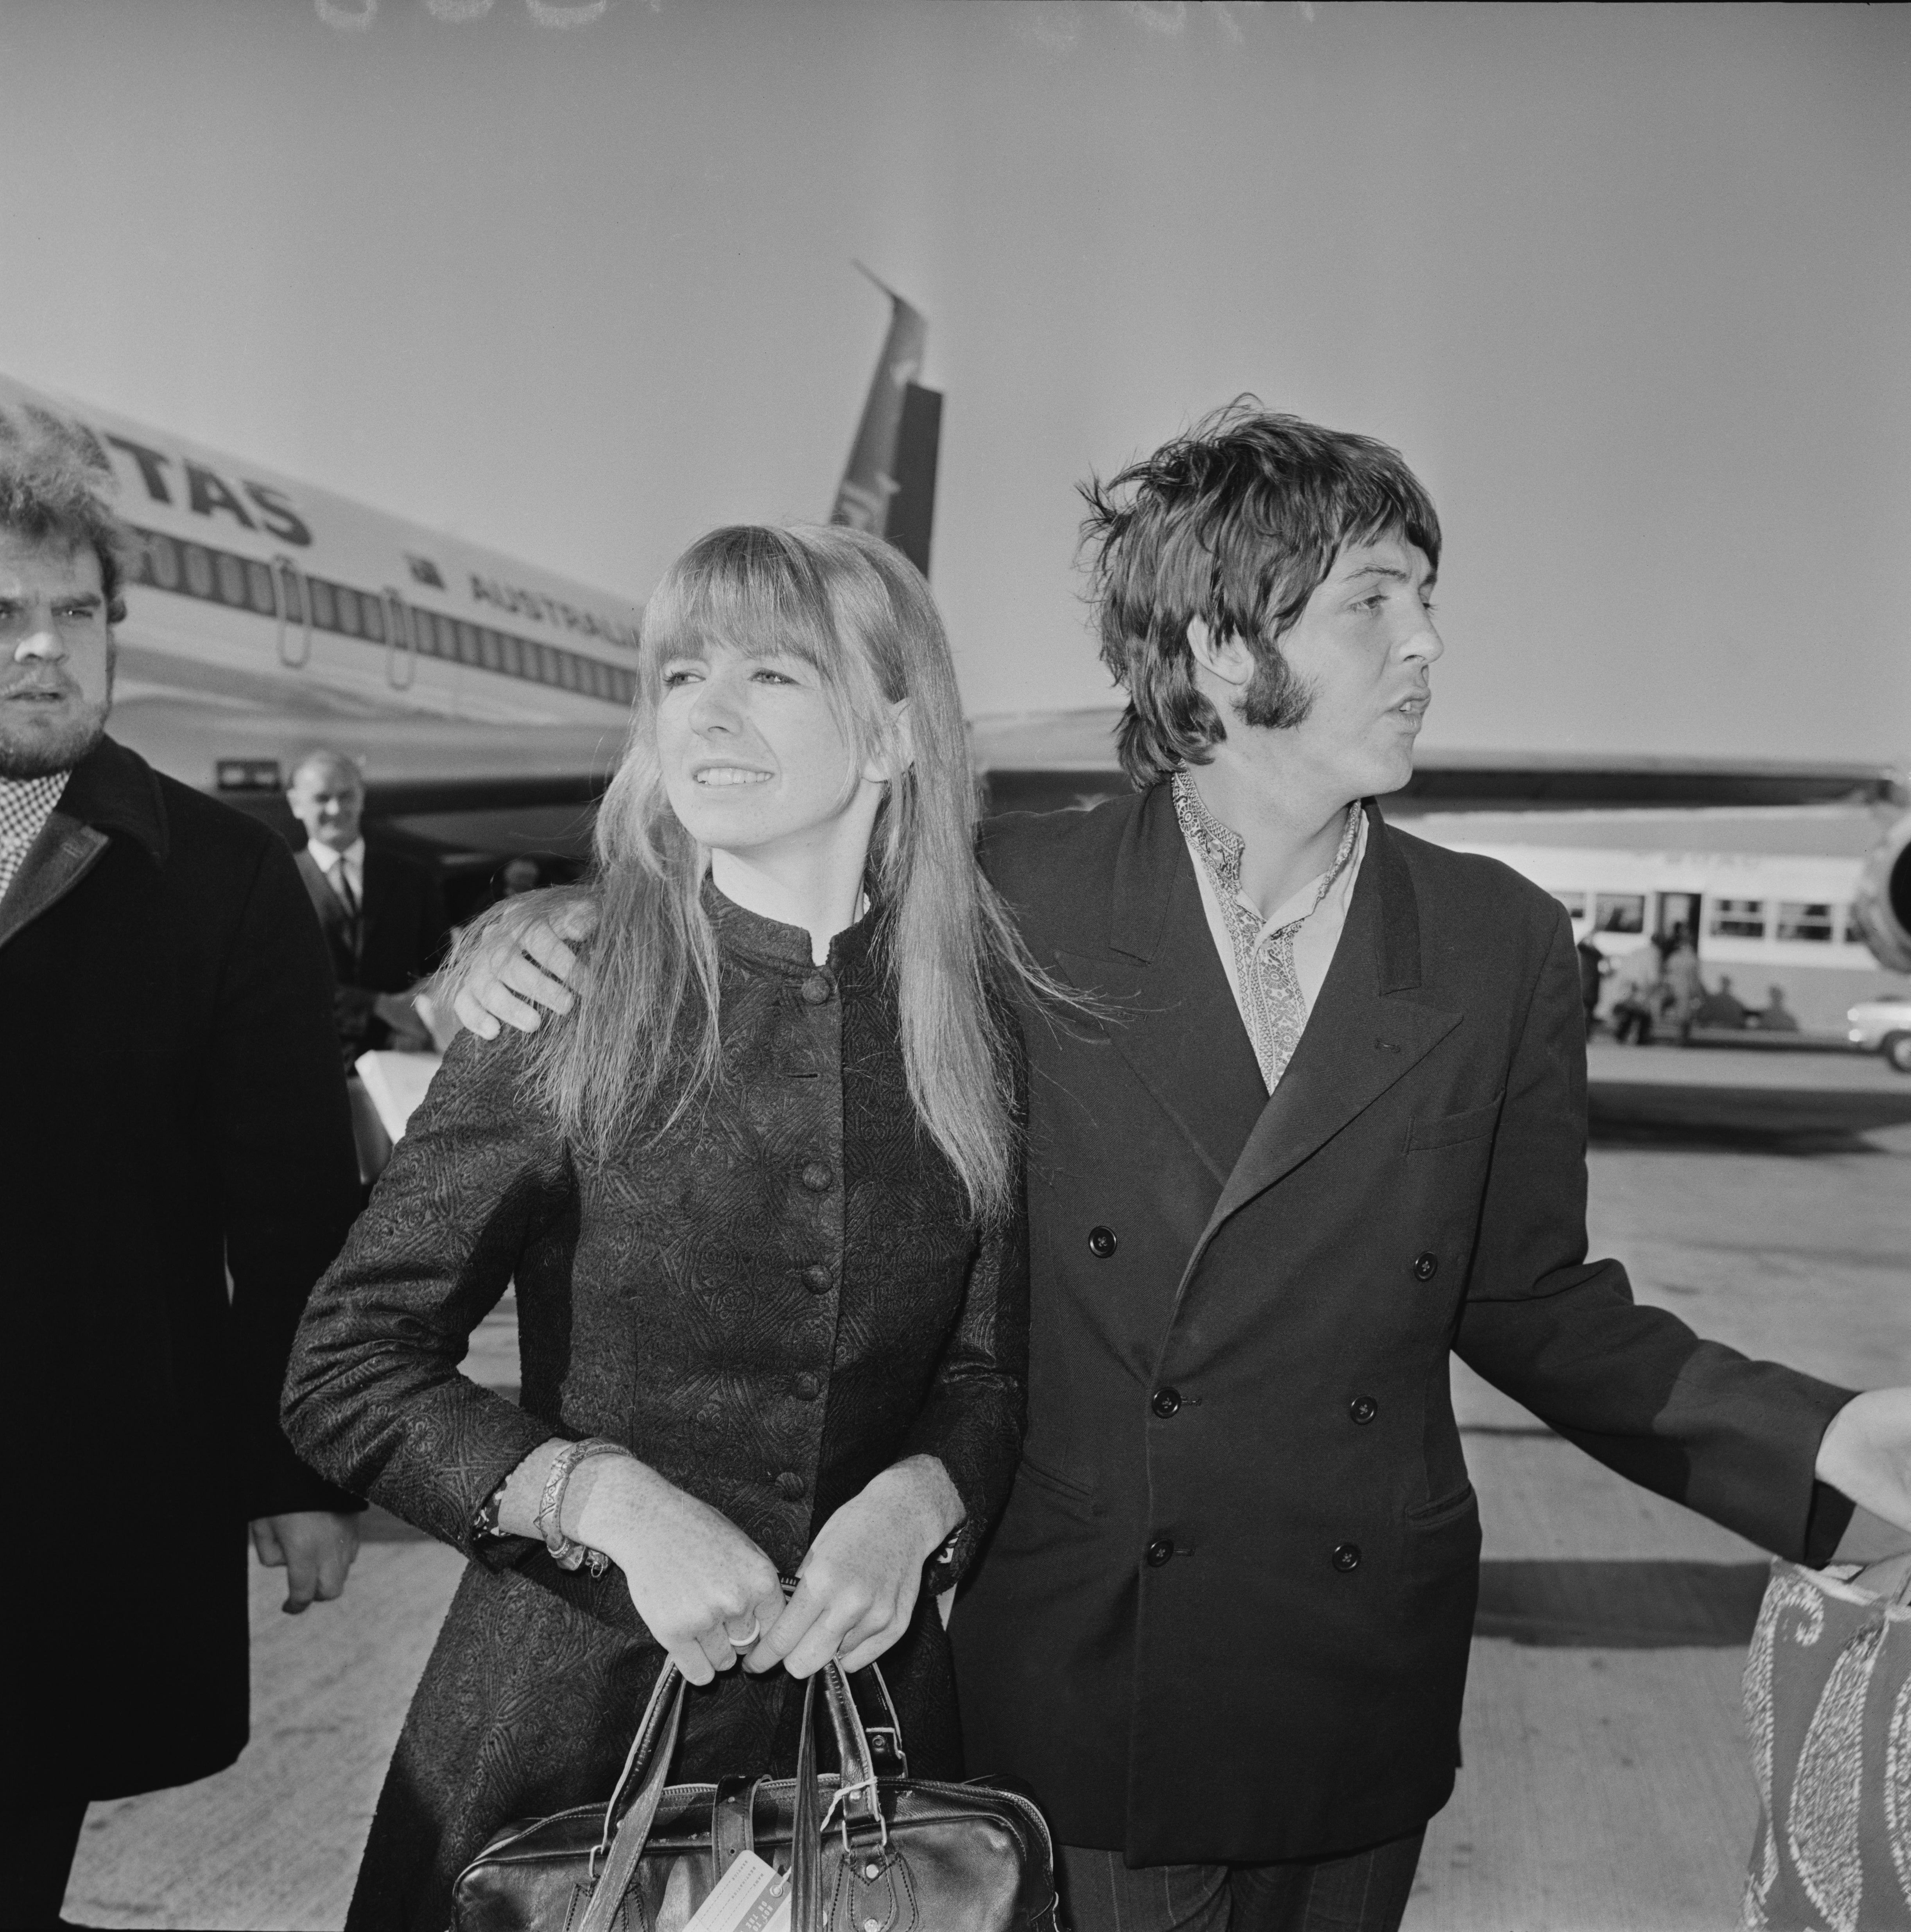 Jane Asher and Paul McCartney at Heathrow Airport in 1968